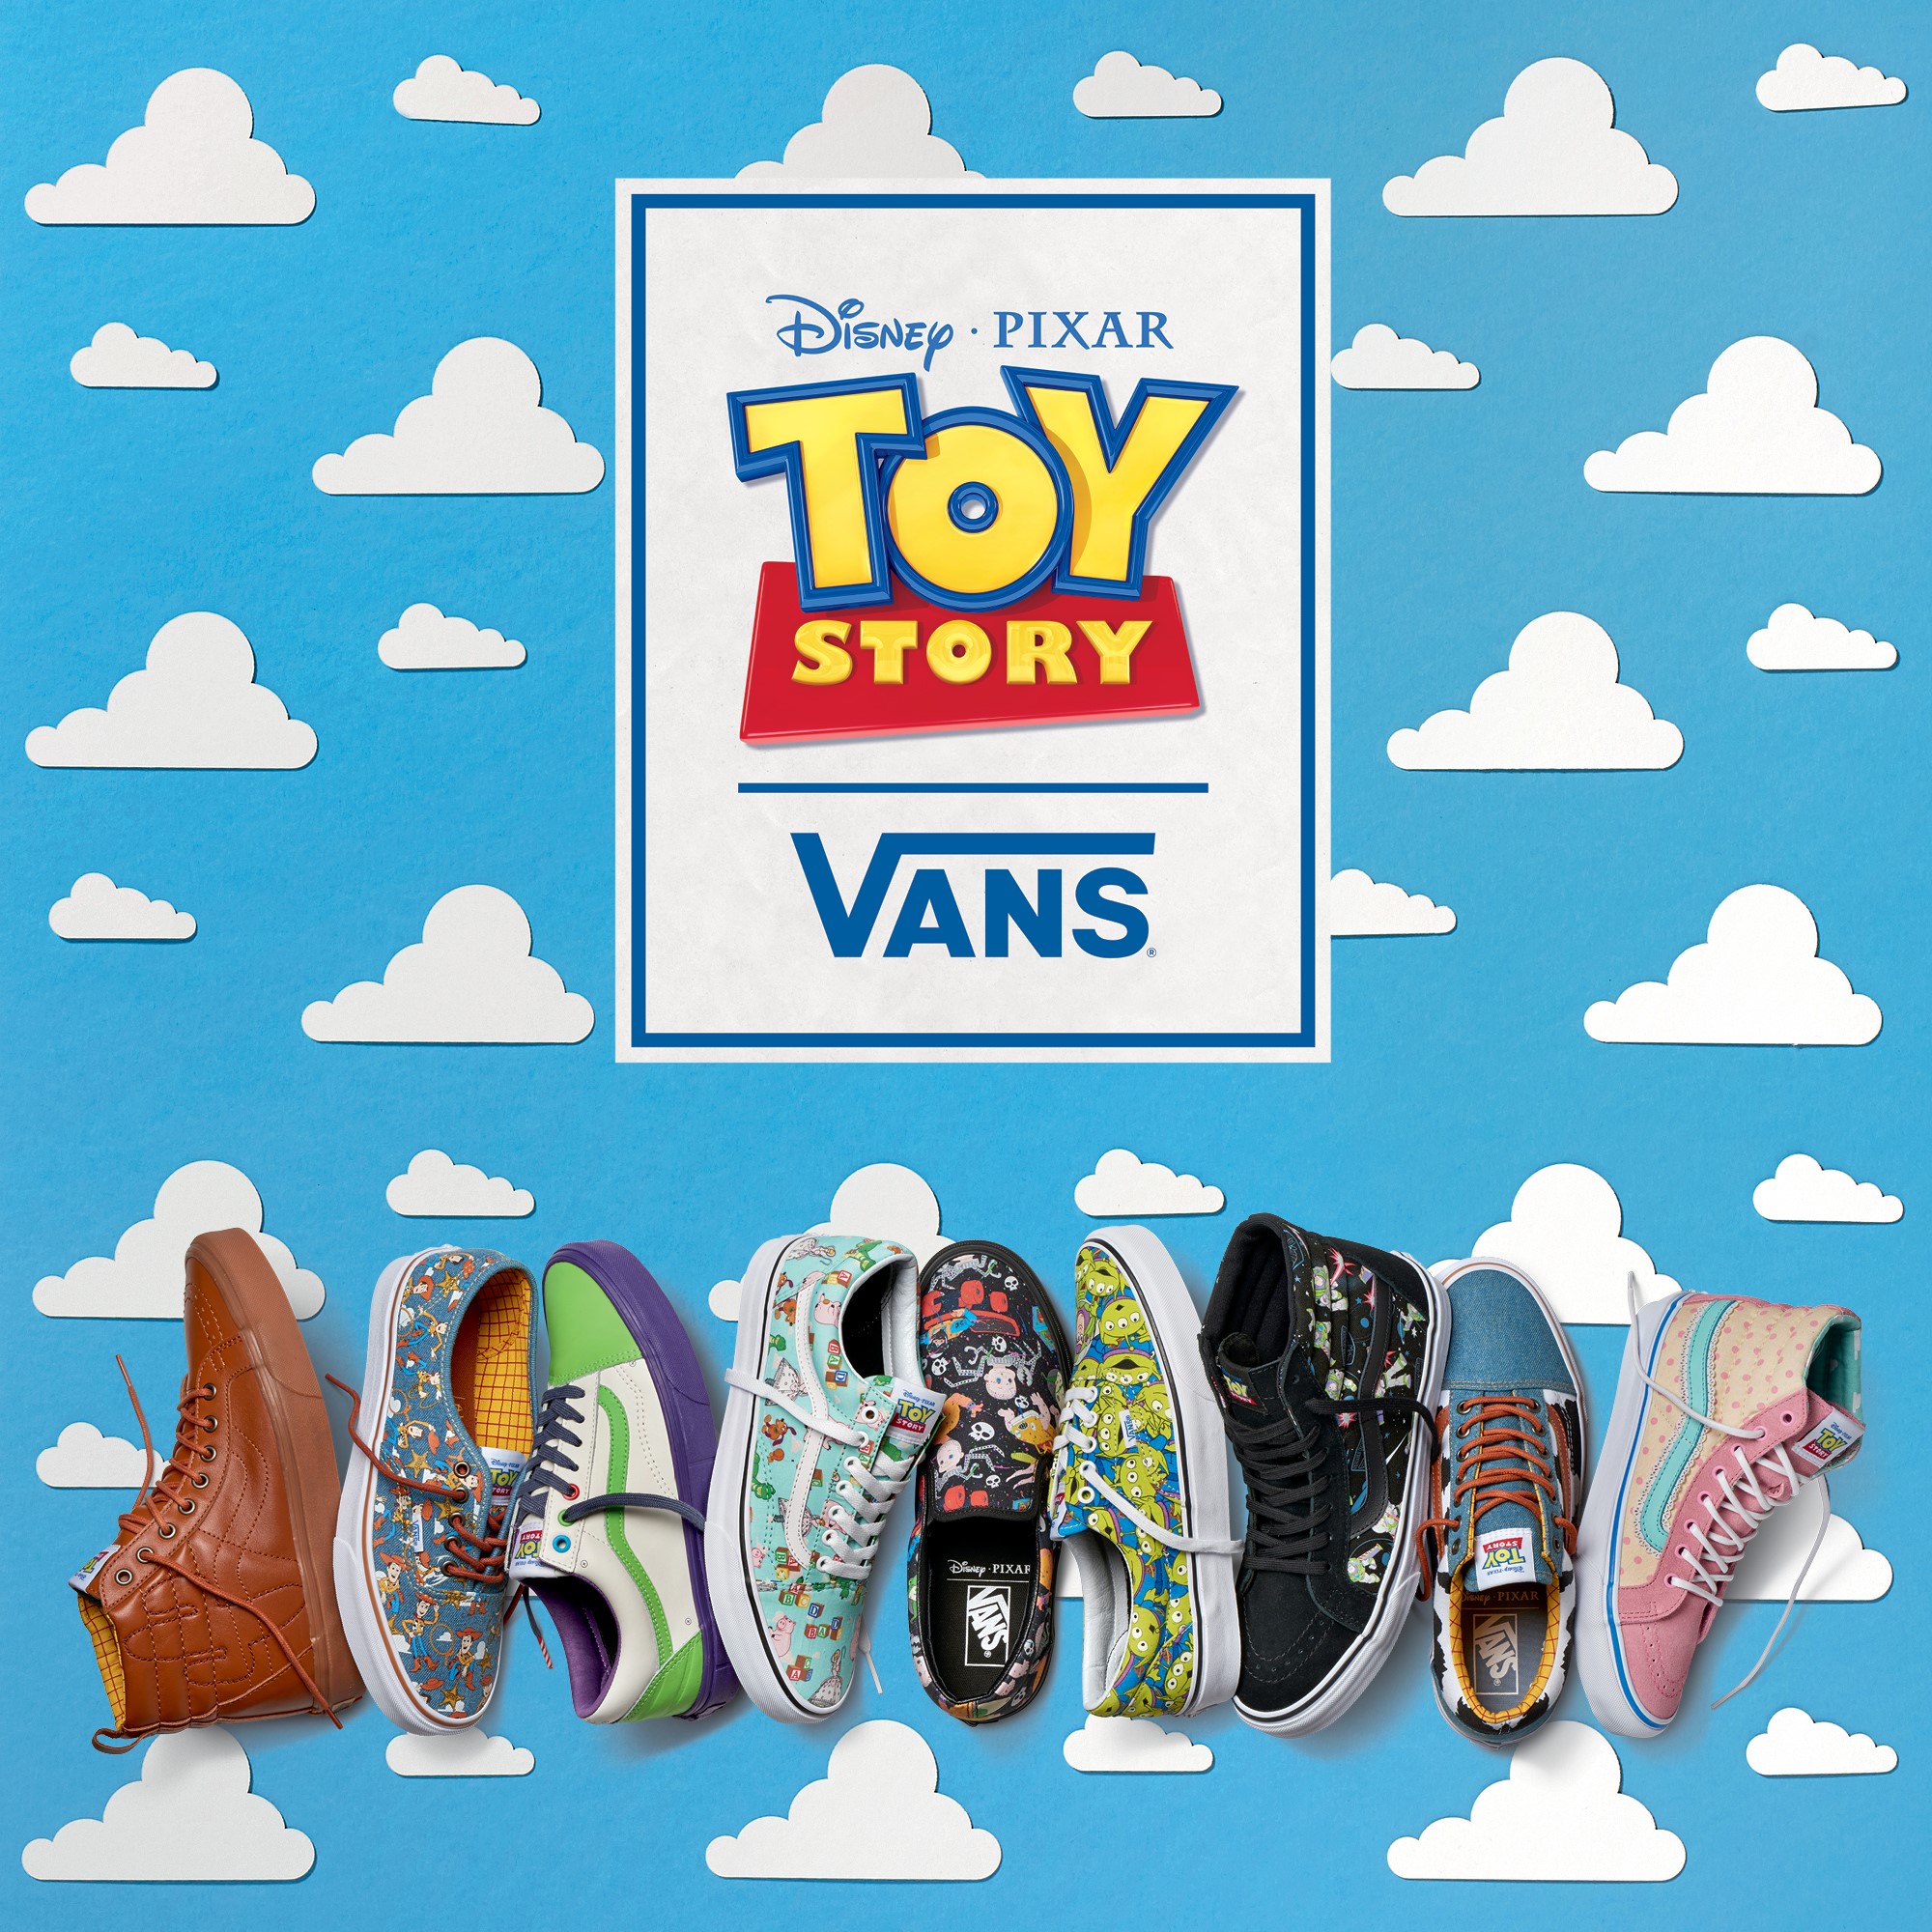 Denmark spine wherever Vans goes to Infinity and Beyond with Toy Story-Inspired Collection